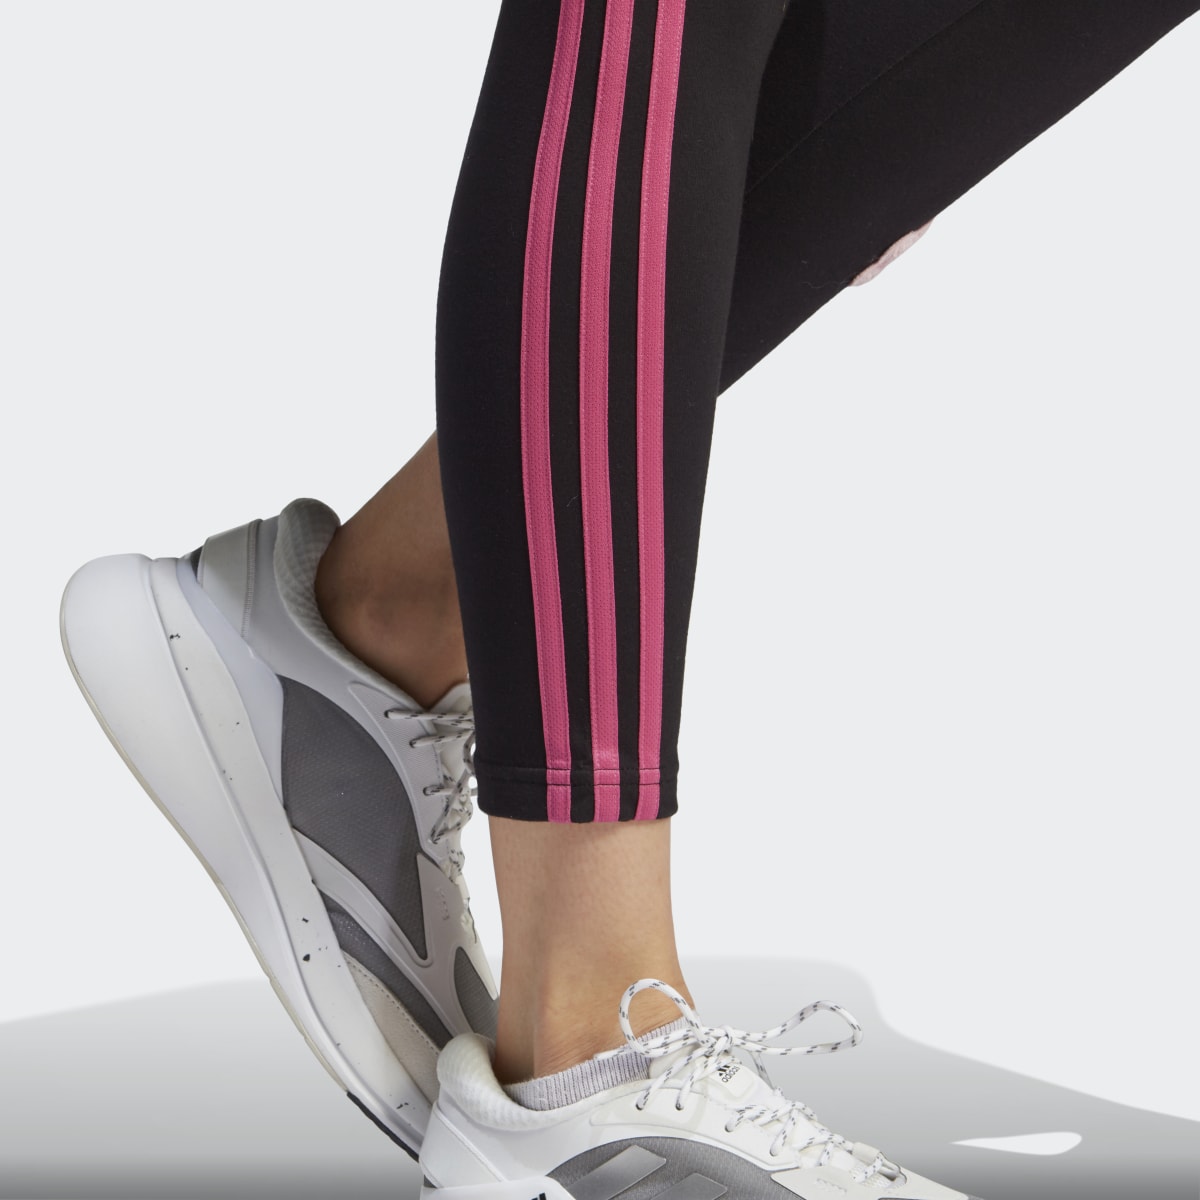 Adidas 3-Stripes High-Rise Cotton Leggings With Chenille Flower Patches. 6